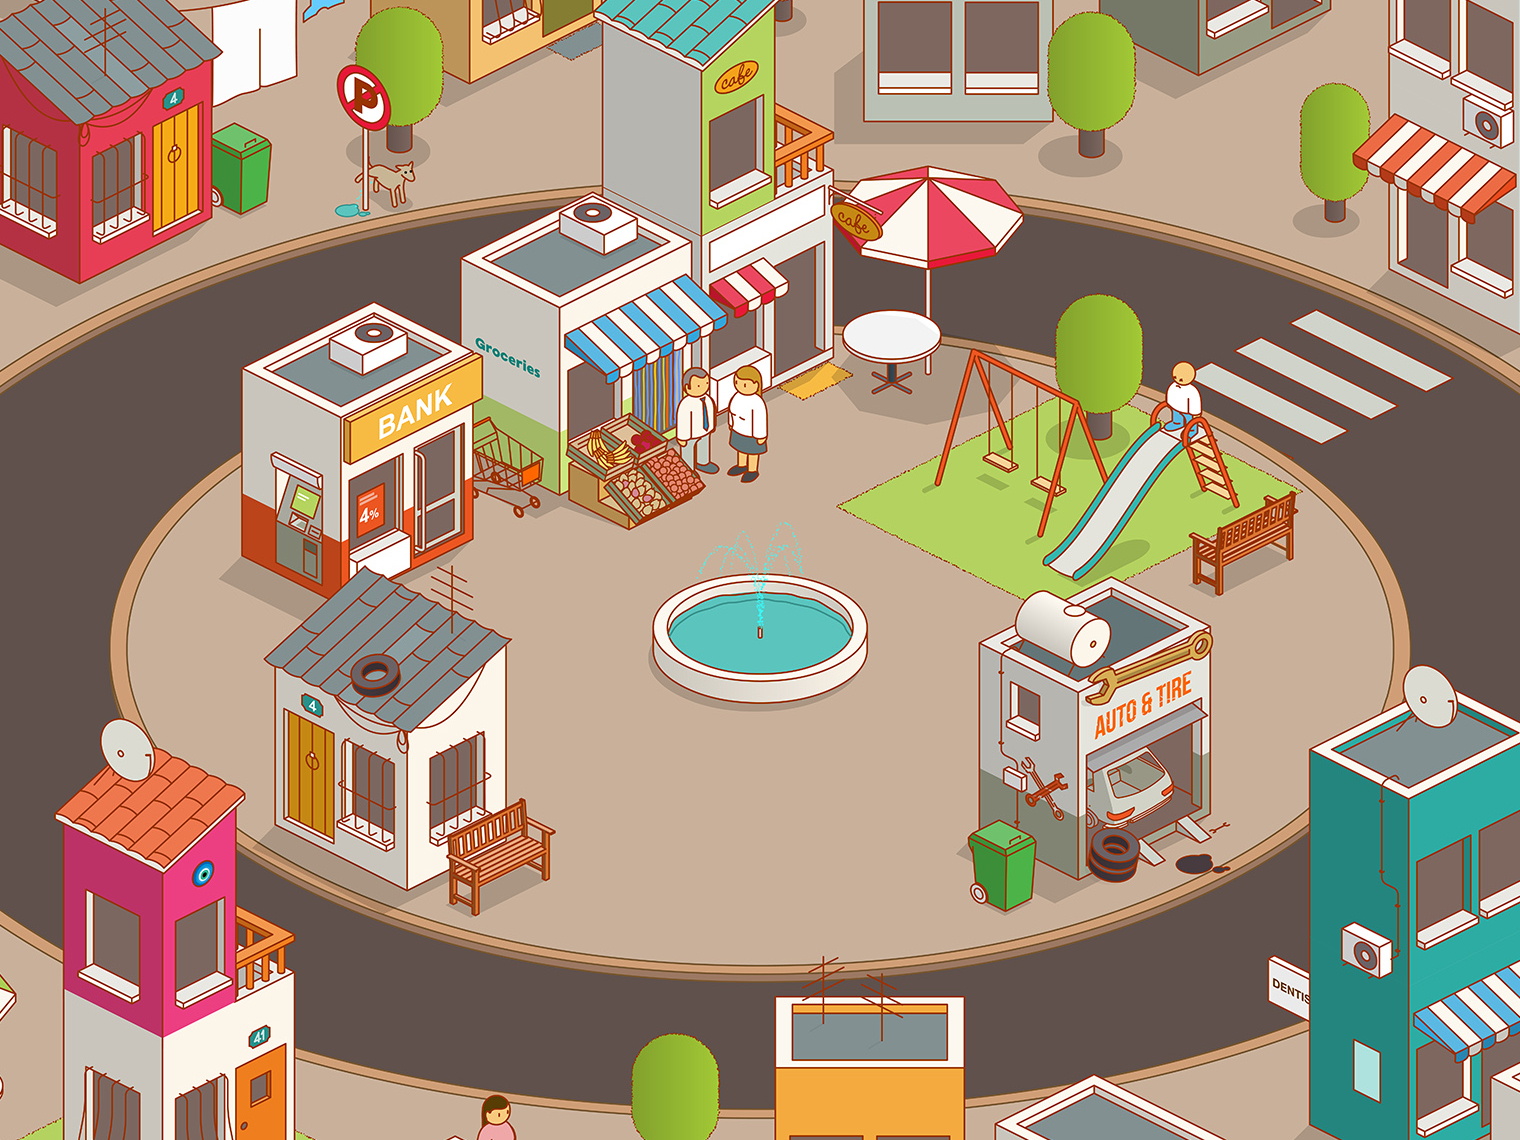 small town square by anil yanik on Dribbble